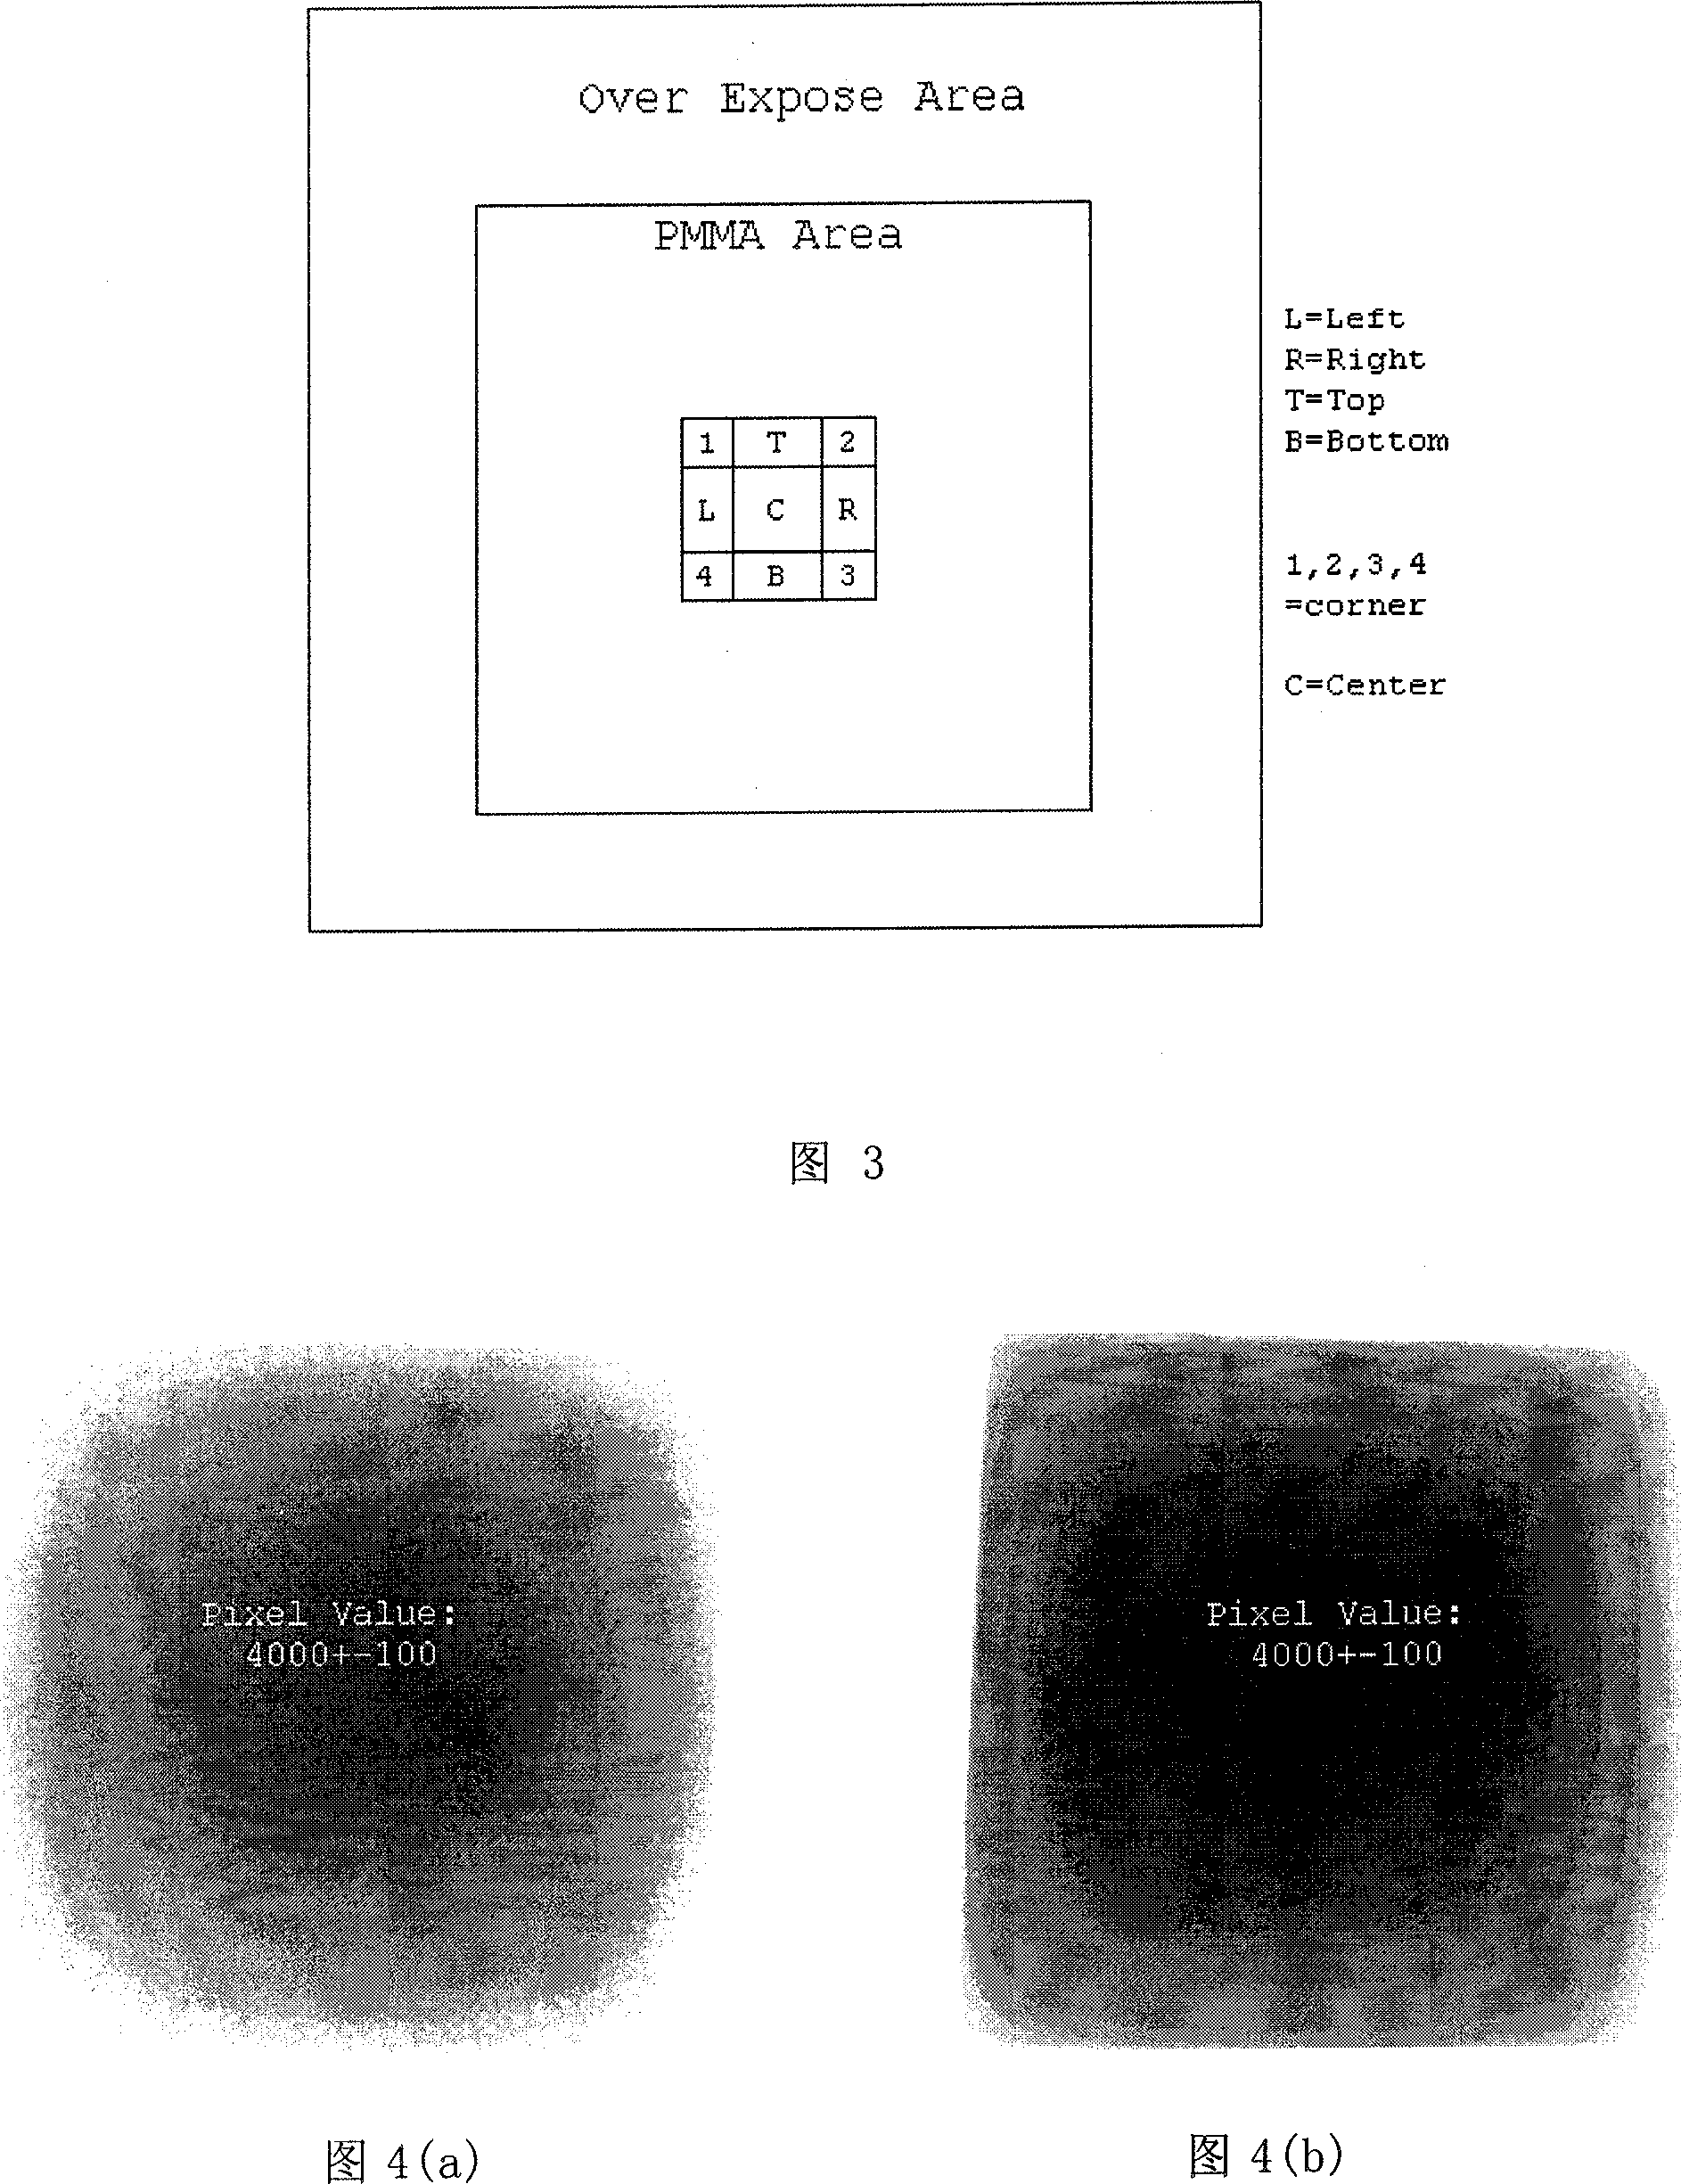 Virtual grid imaging method and system used for eliminating influence of scattered radiation